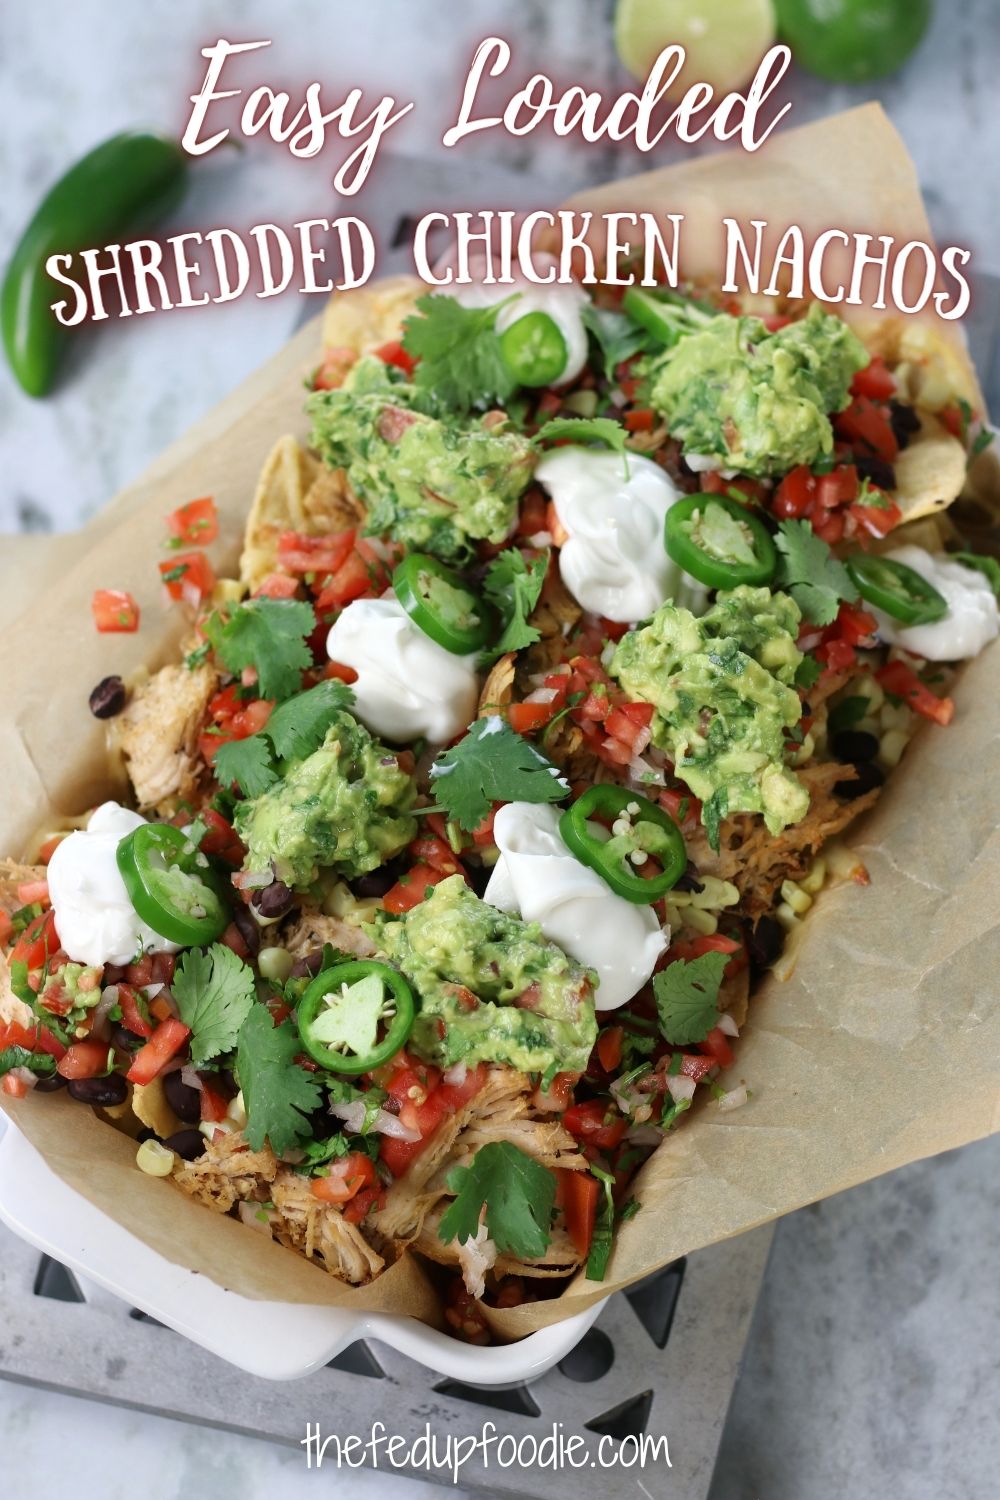 Shredded Chicken Nachos is an easy family favorite recipe. Loaded with mouthwatering toppings like Homemade Guacamole, Pico de Gallo, Jack Cheese and sour cream. This dinner is crunchy, tasty and completely satisfying. 
#ShreddedChickenRecipes #ShreddedChickenNachos #ShreddedChickenNachosEasy #ShreddedChickenNachosRecipeEasy #ShreddedChickenNachosAirFryer #LoadedNachosRecipeChicken #ChickenNachosRecipeEasy 